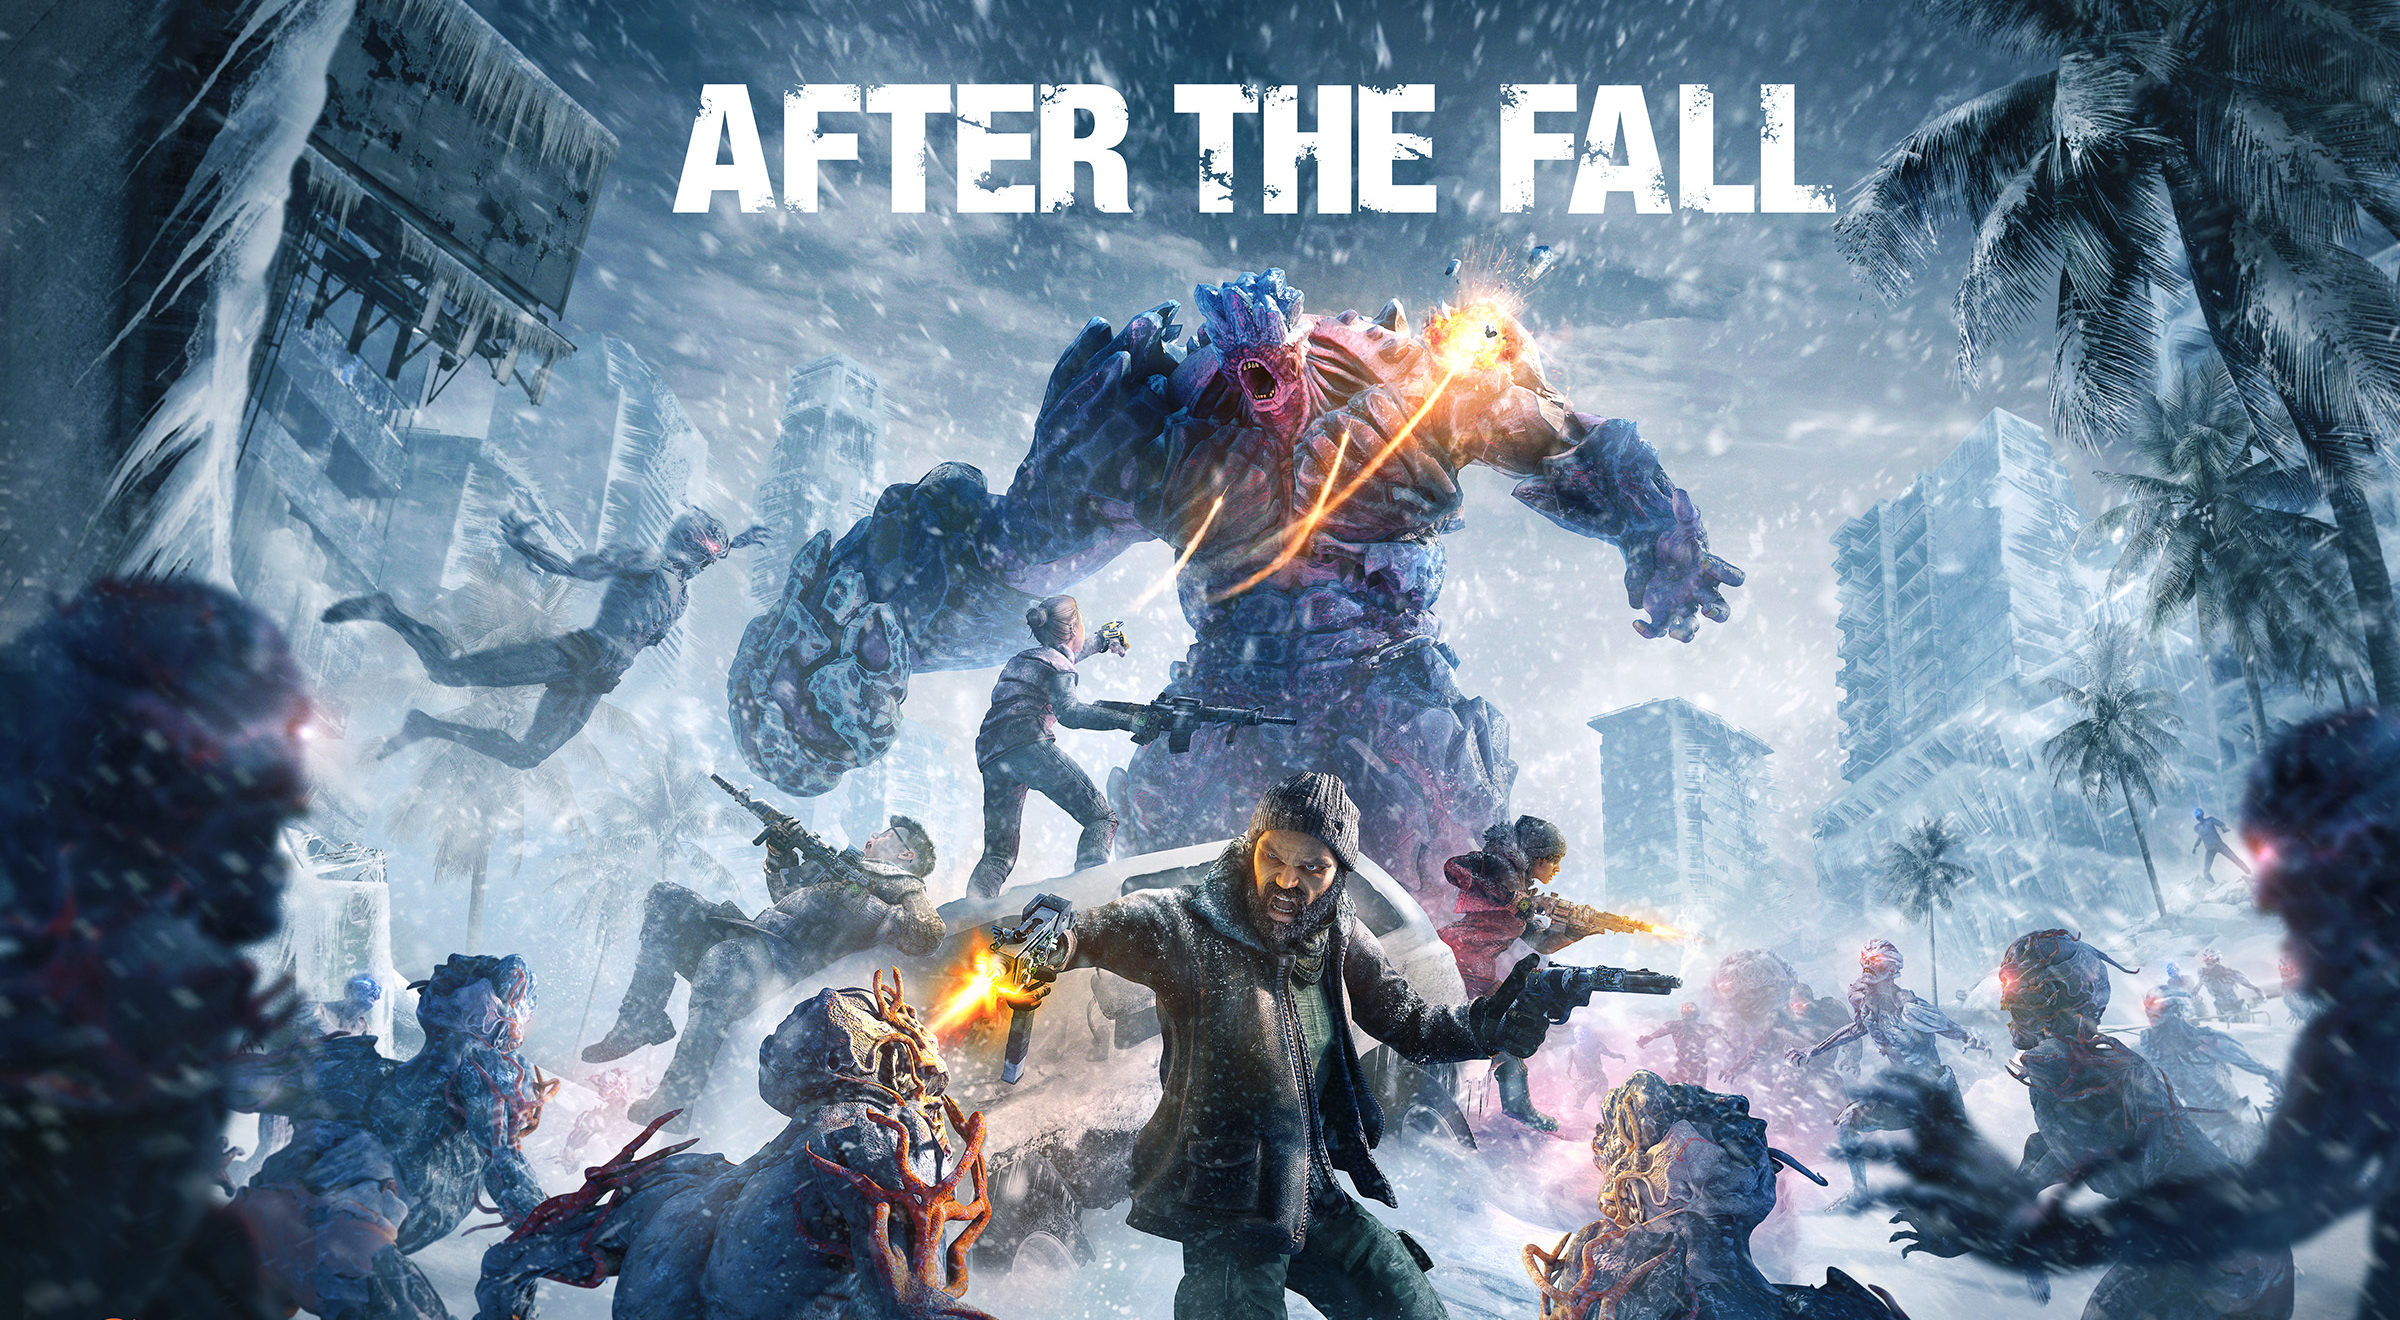 After The Fall' Looks Like The VR Zombie Game We've All For - VRScout